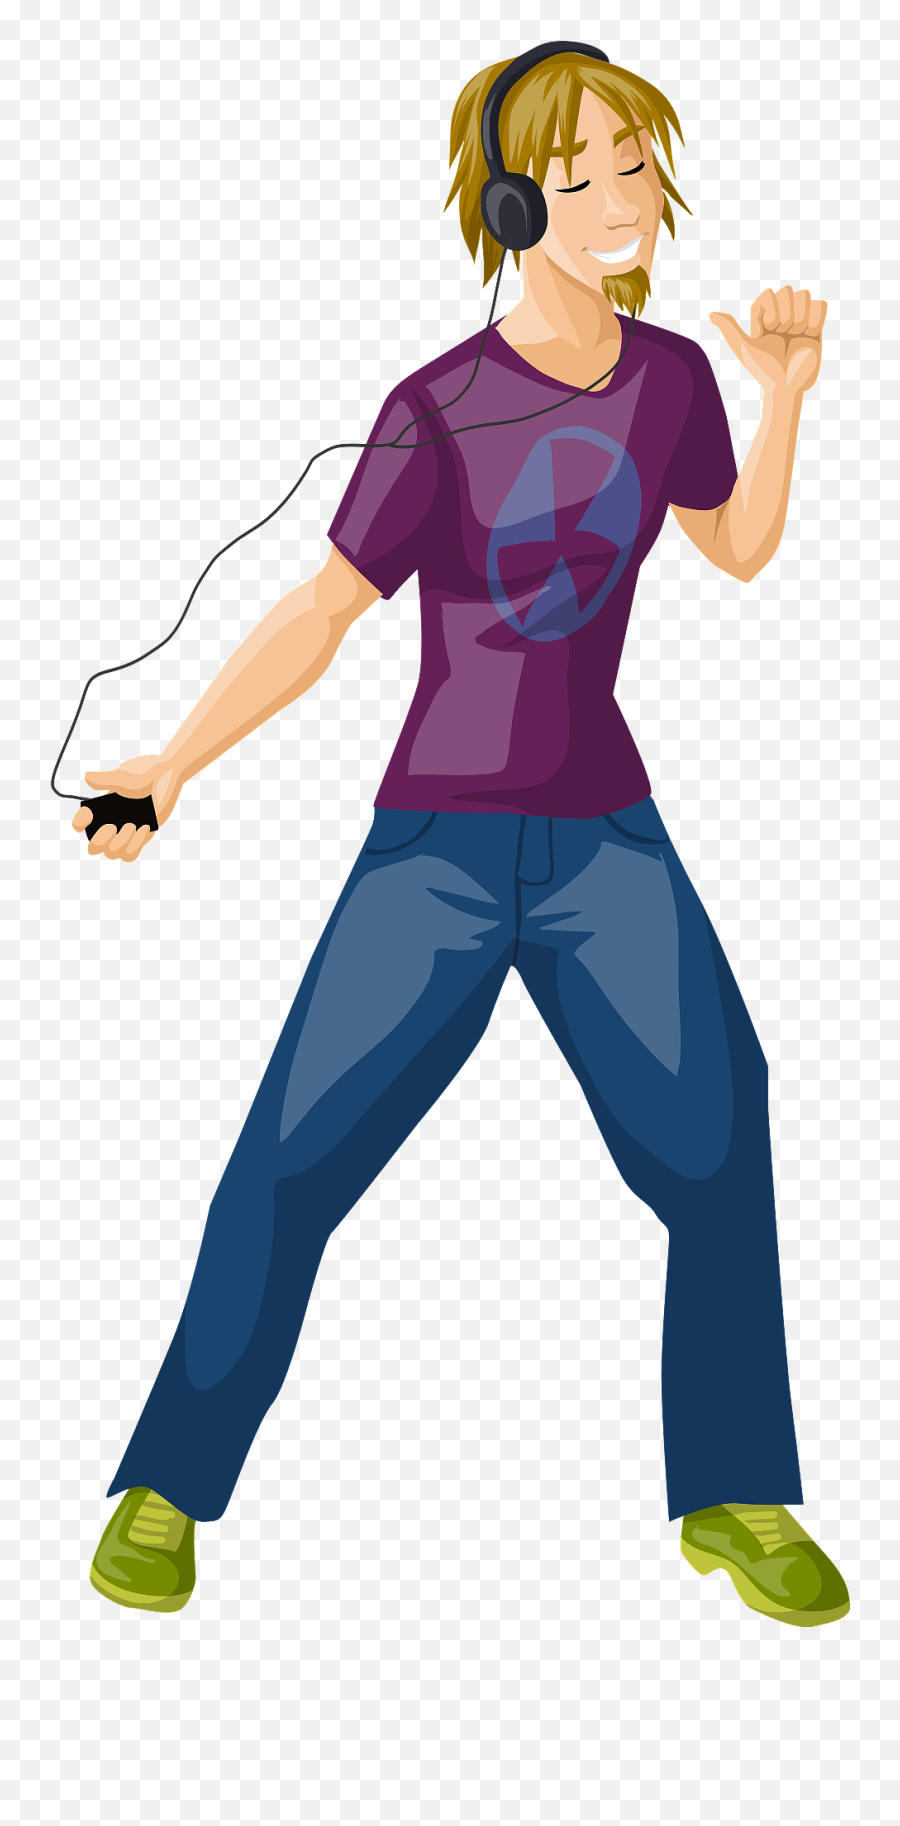 Man Is Dancing And Listening To Music Clipart Free Download - Fun Emoji,Listening Clipart